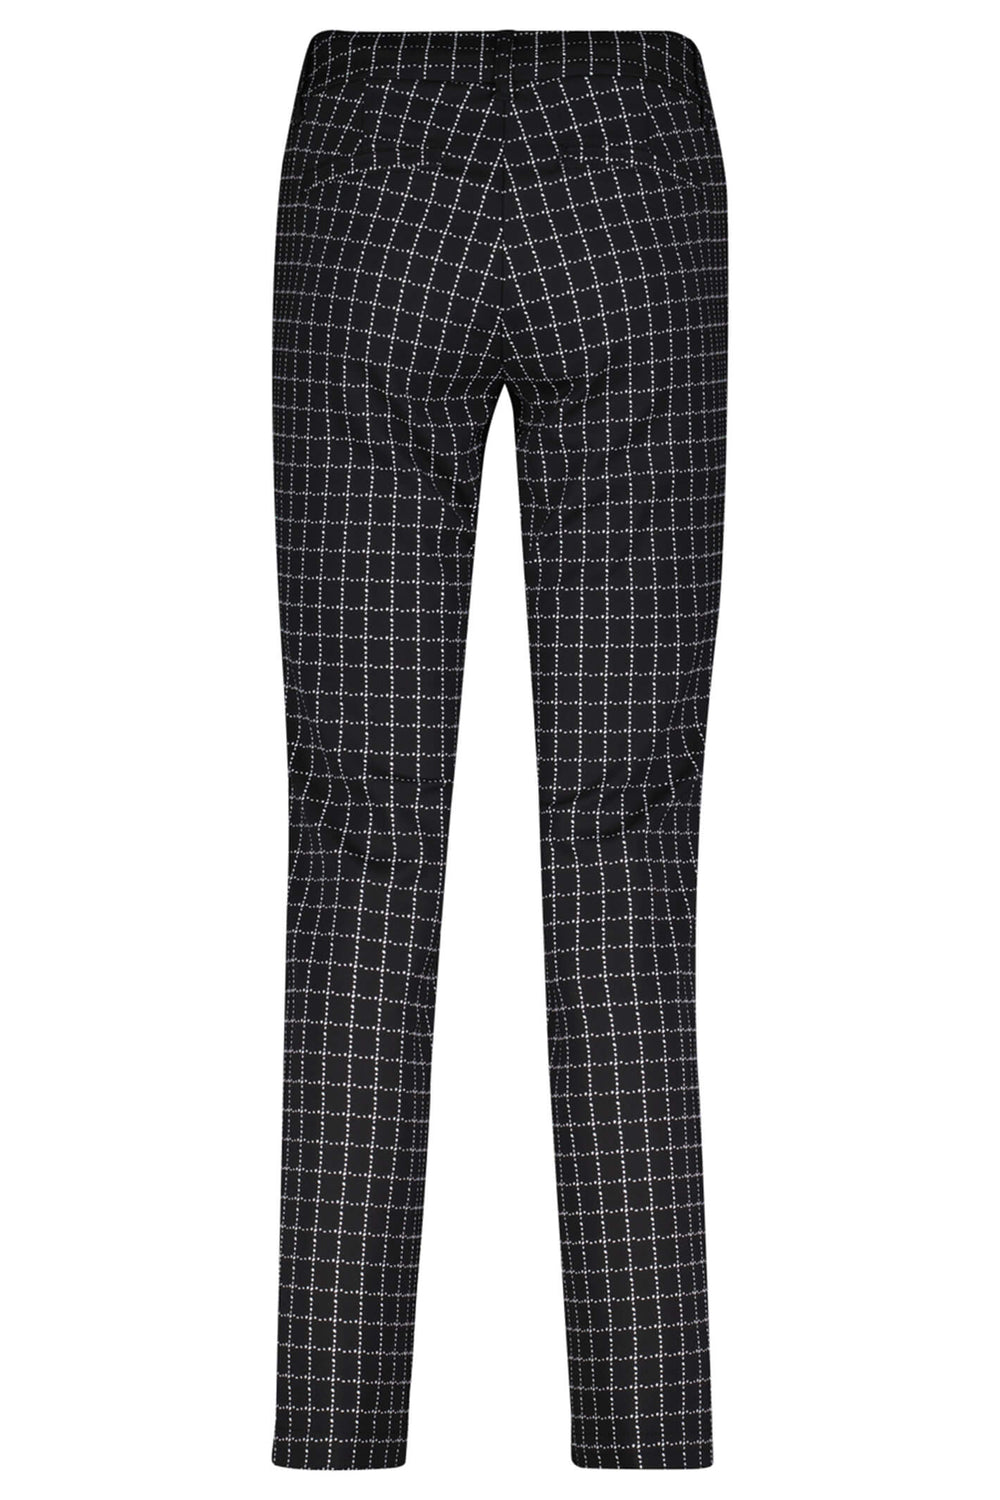 Red Button SRB4115 Diana Black Fancy Check Trousers - Olivia Grace Fashion